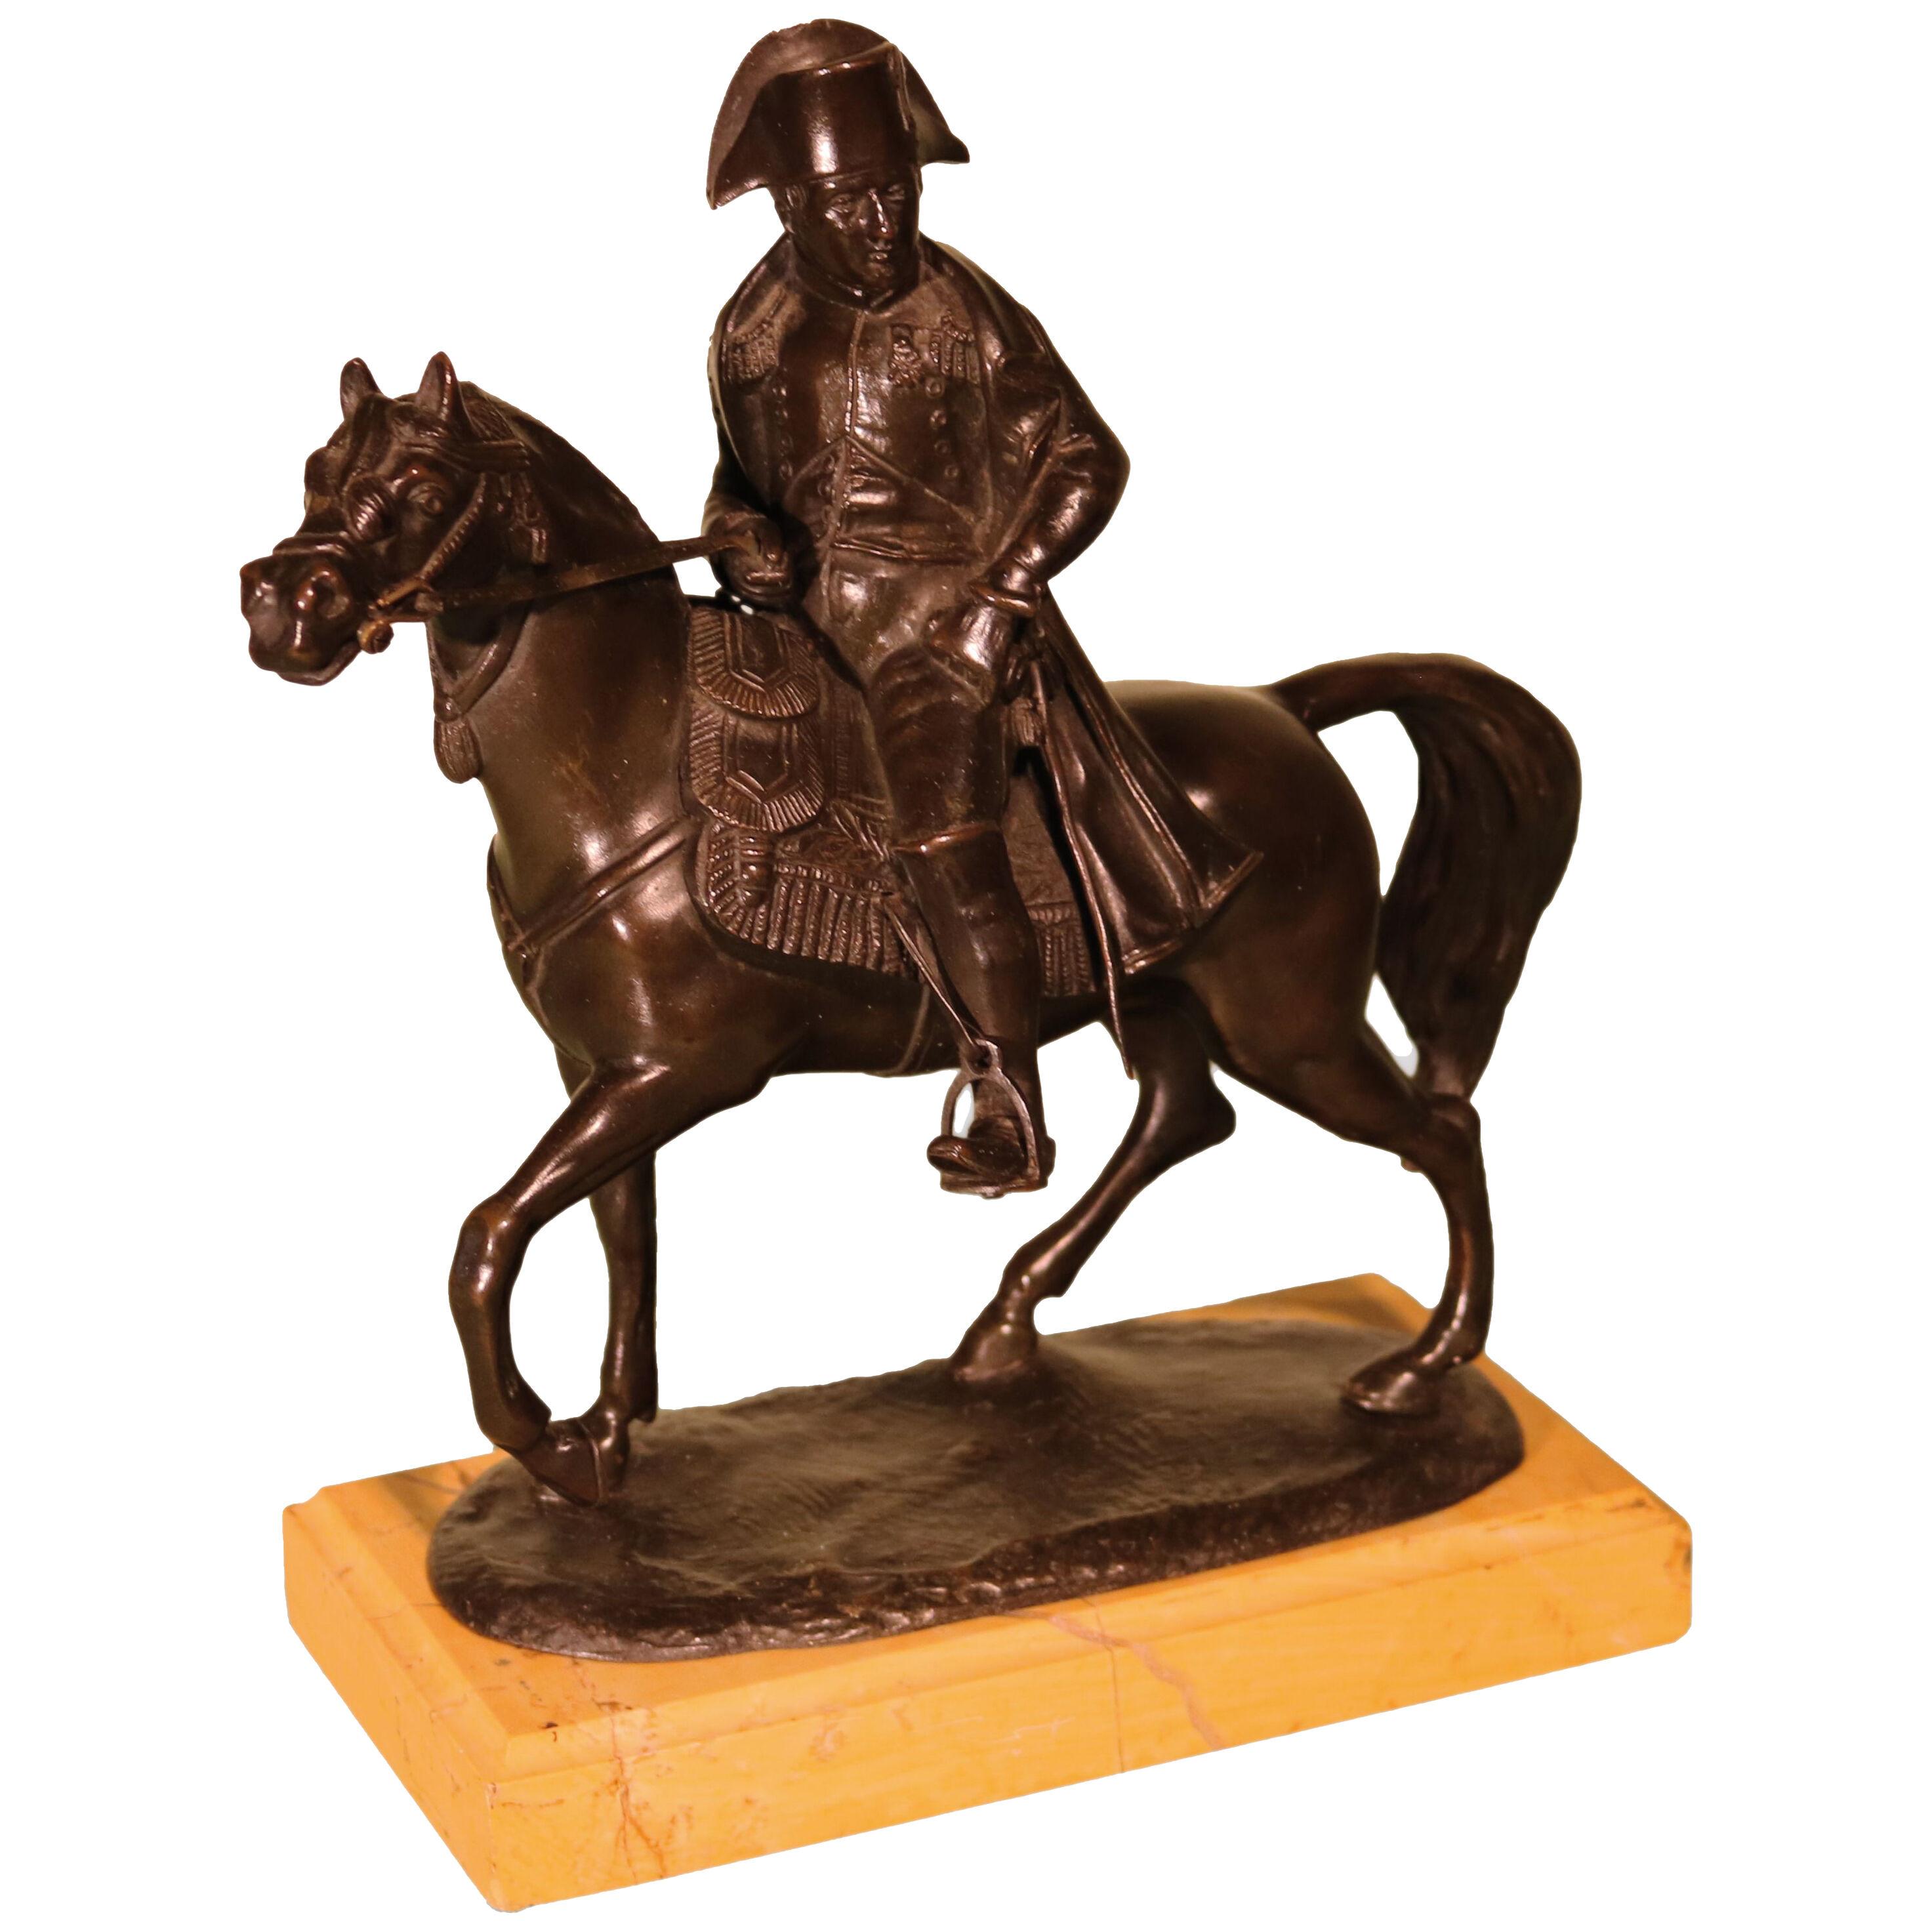 An early 19th century French bronze of Napoleon on Marengo